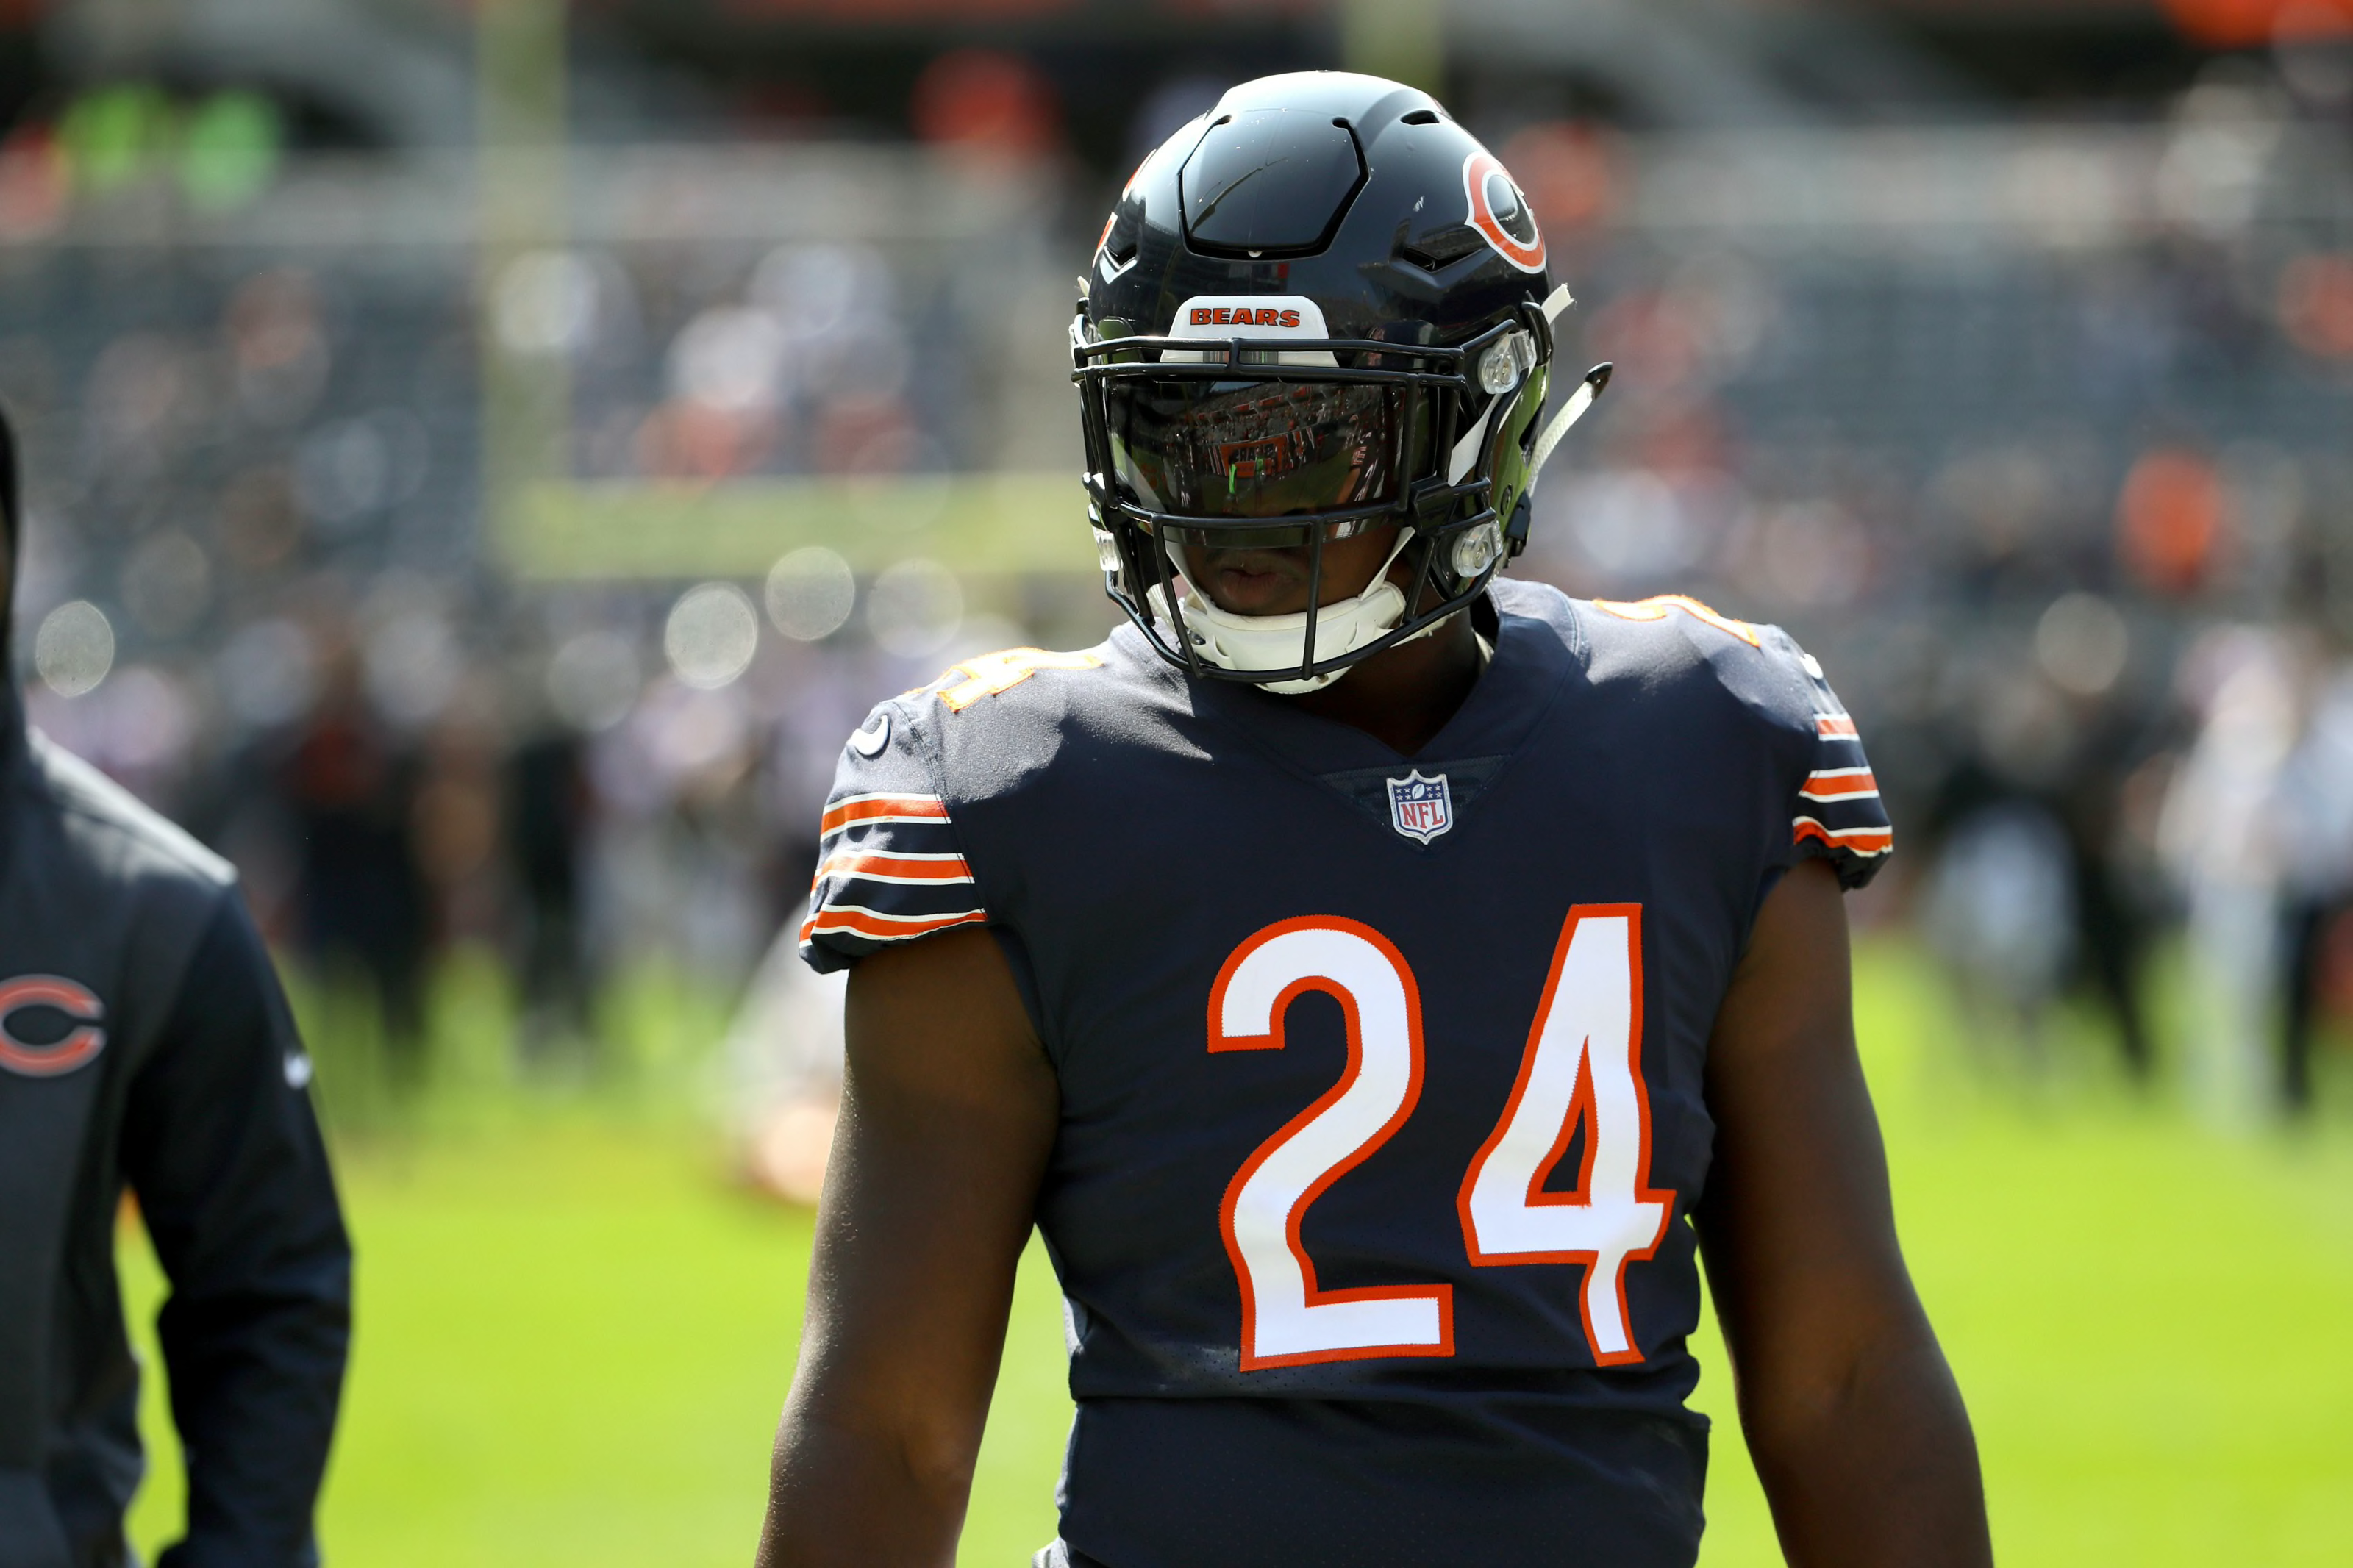 Jordan Howard will prove to be very effective for the Eagles